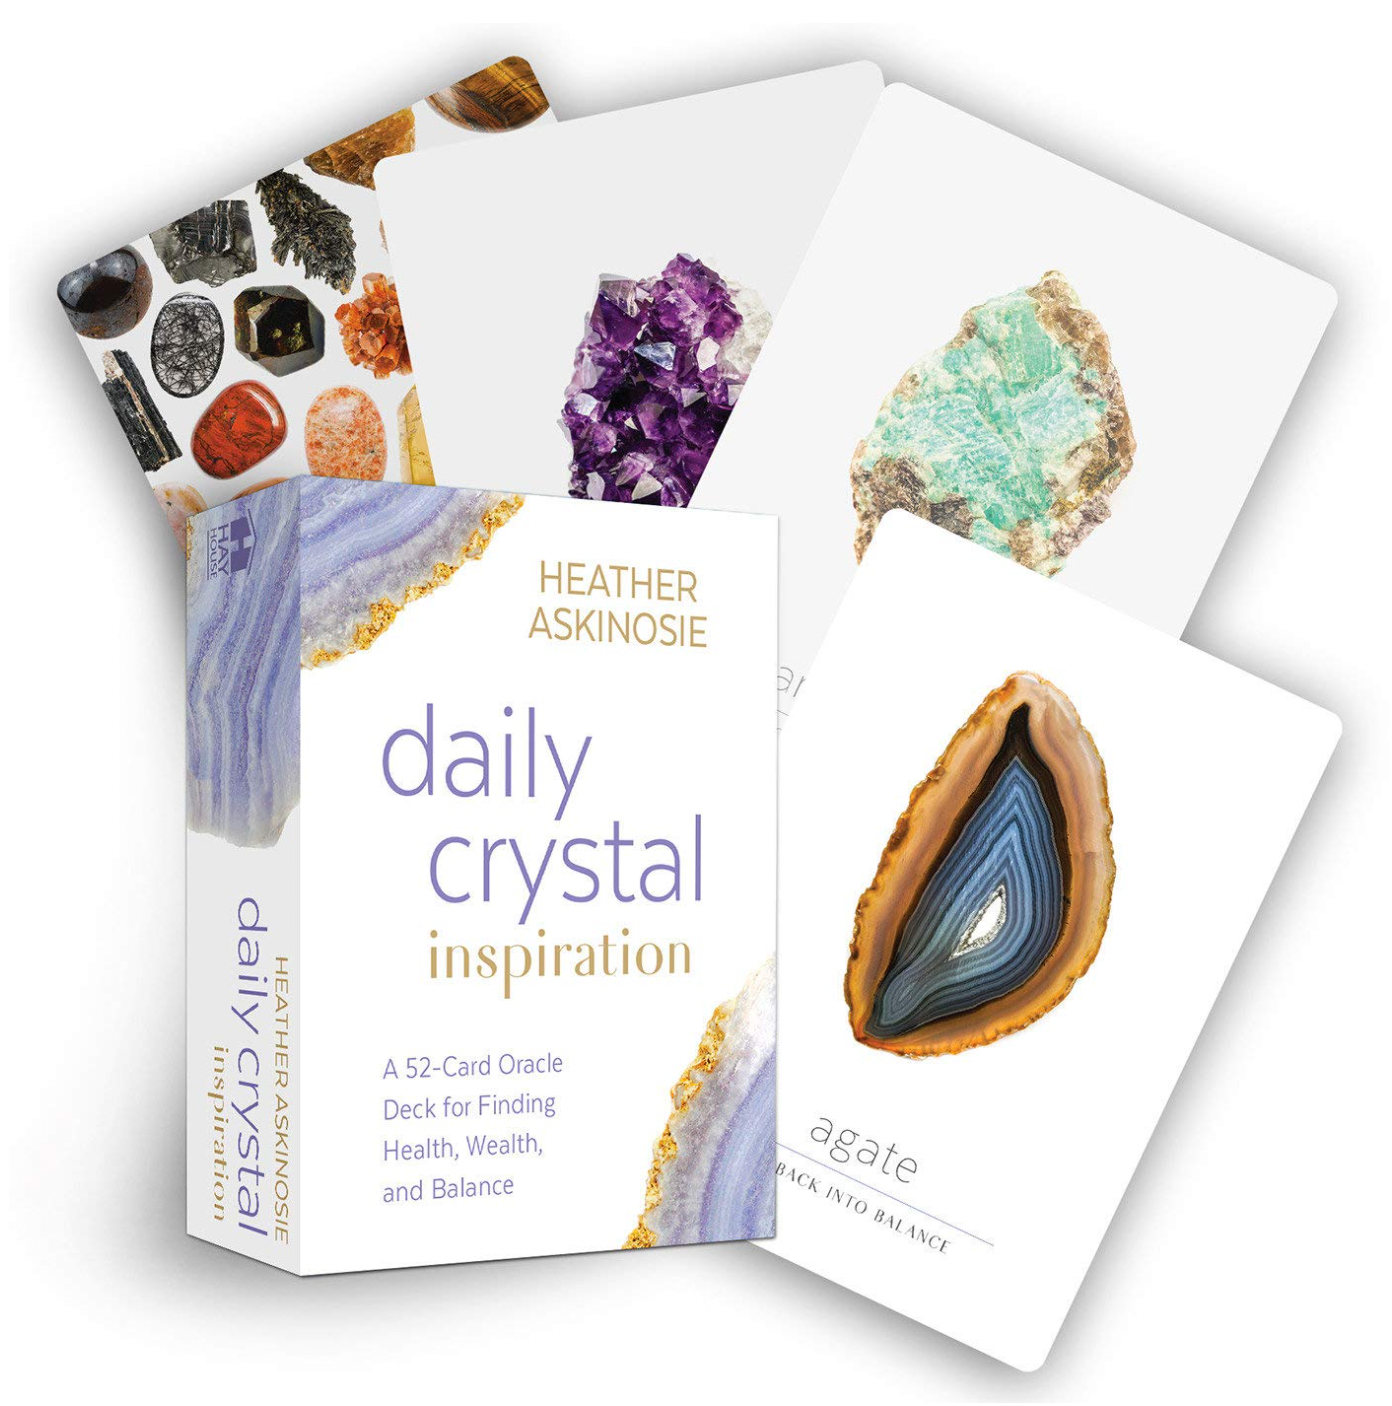 Daily Crystal Inspiration: A 52-Card Oracle Deck for Finding Health, Wealth, and Balance